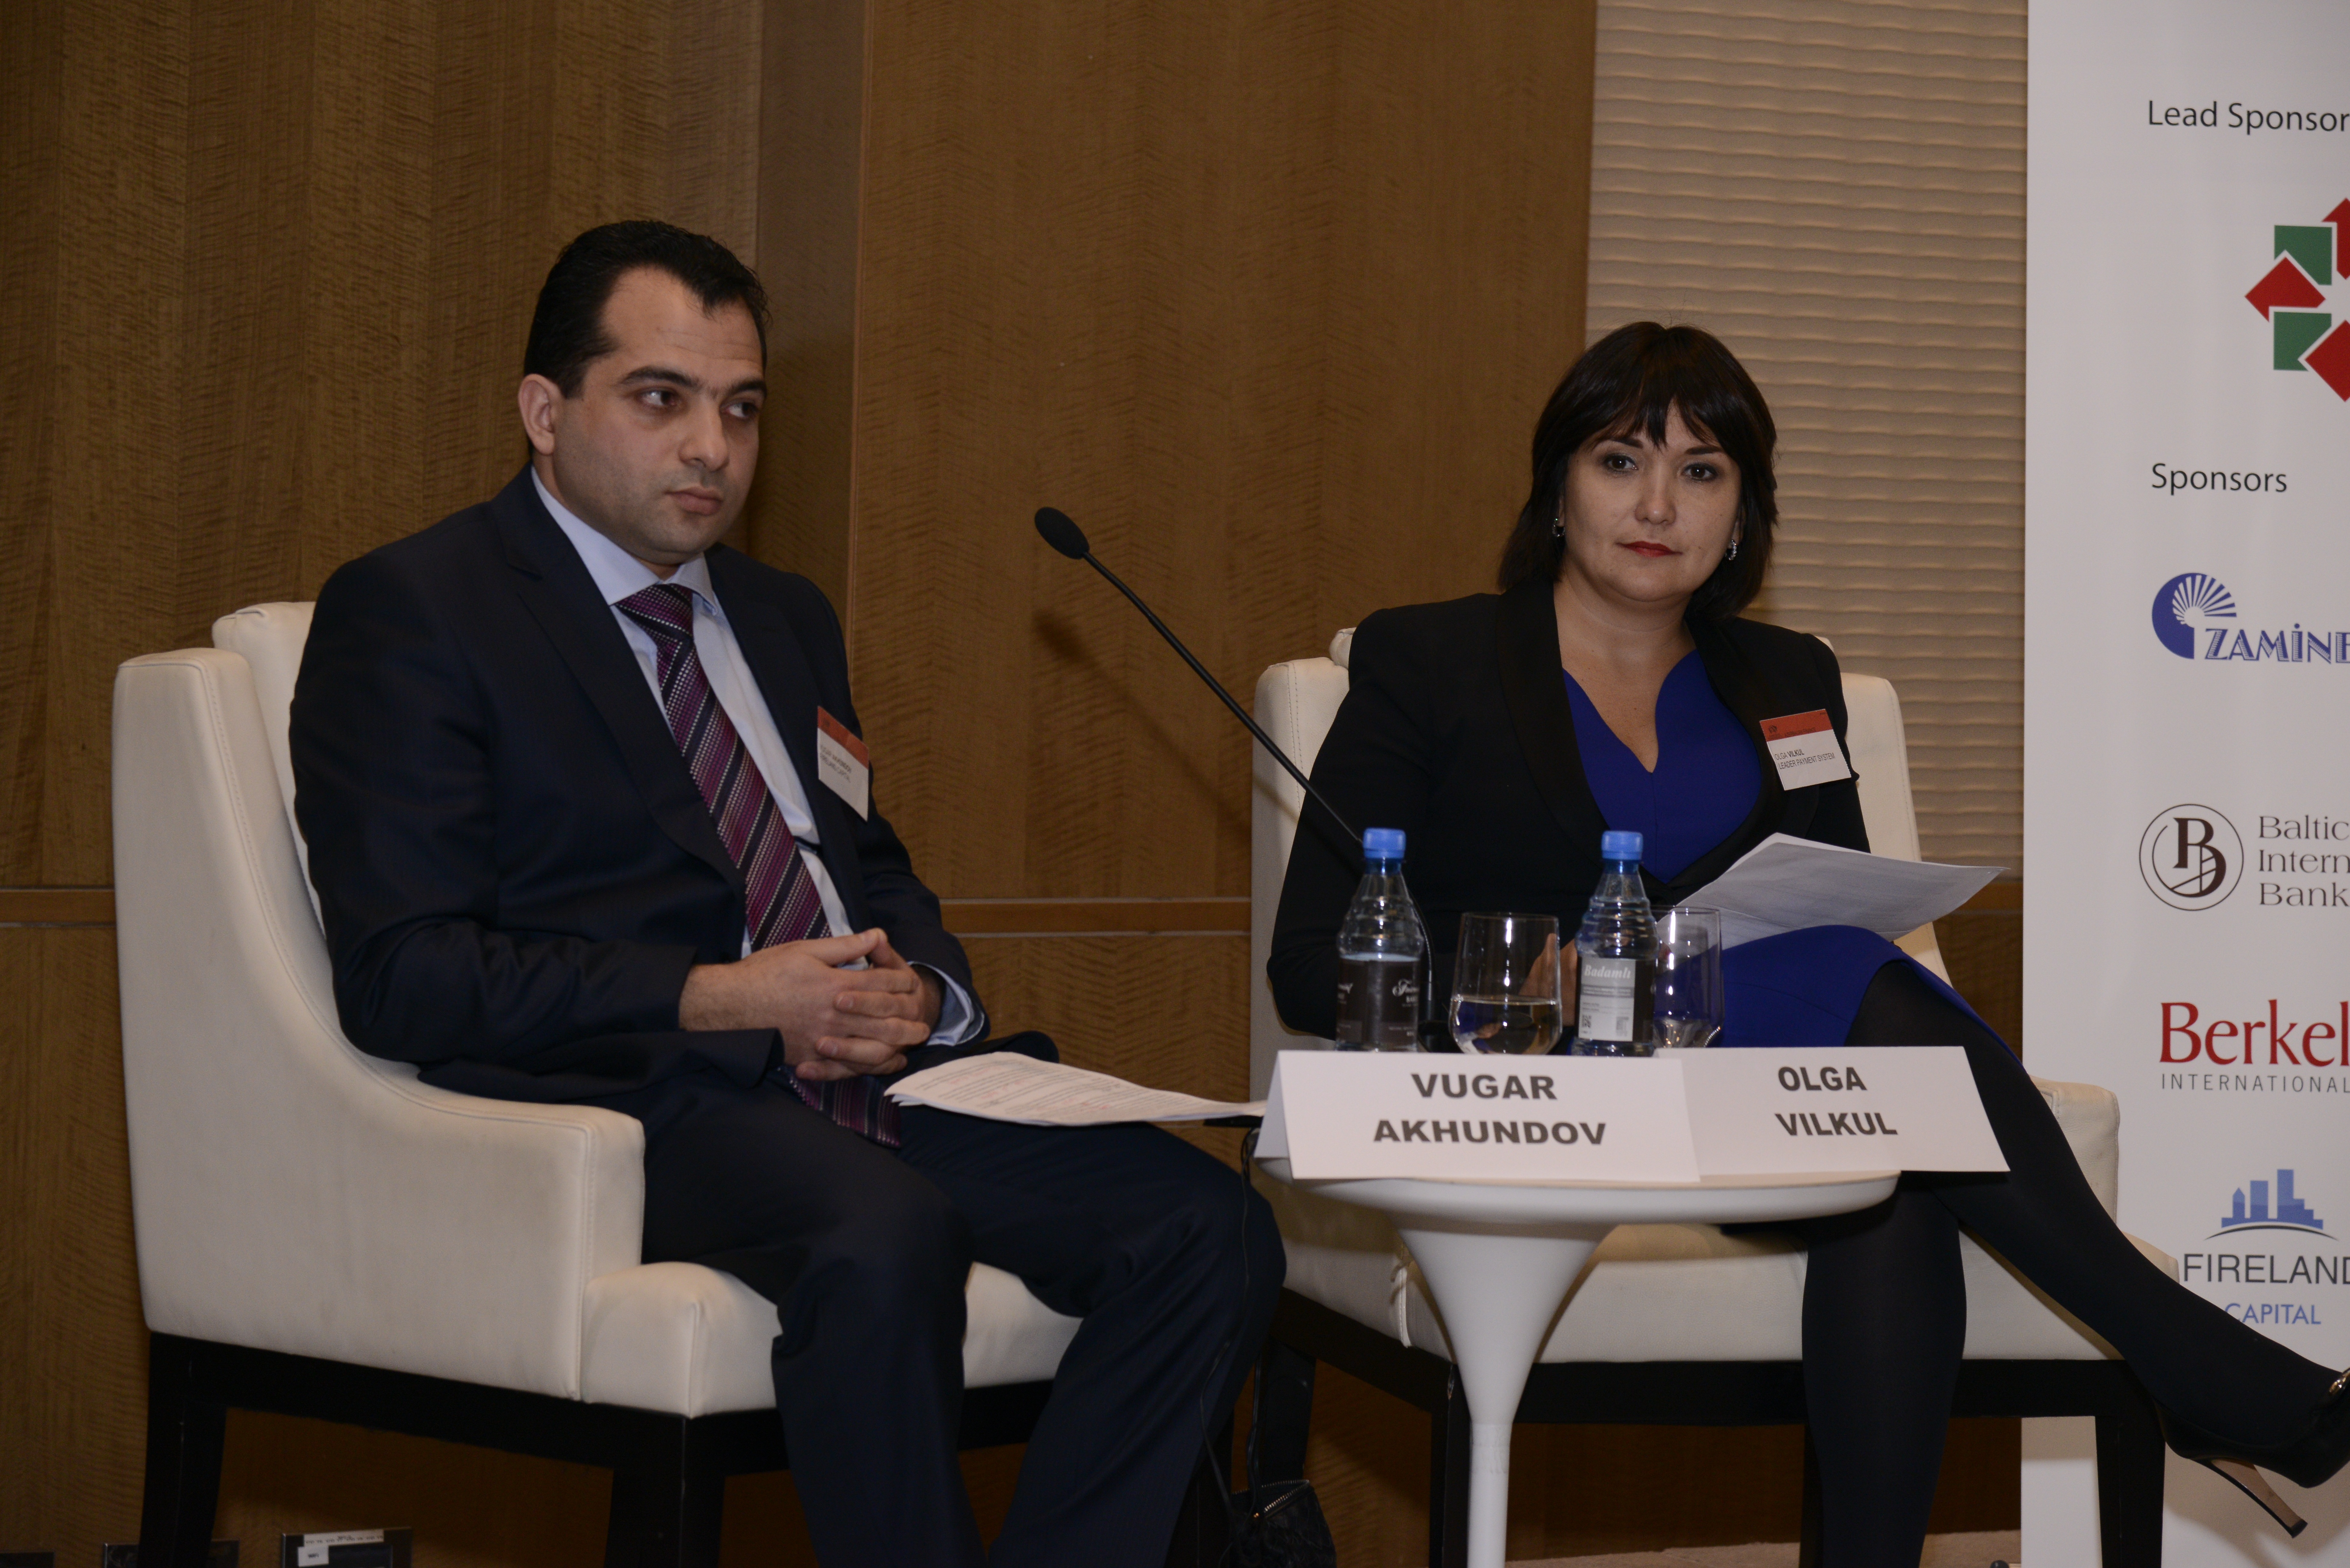 Challenges the payment world faces discussed at Azerbaijan Banking & Finance Forum